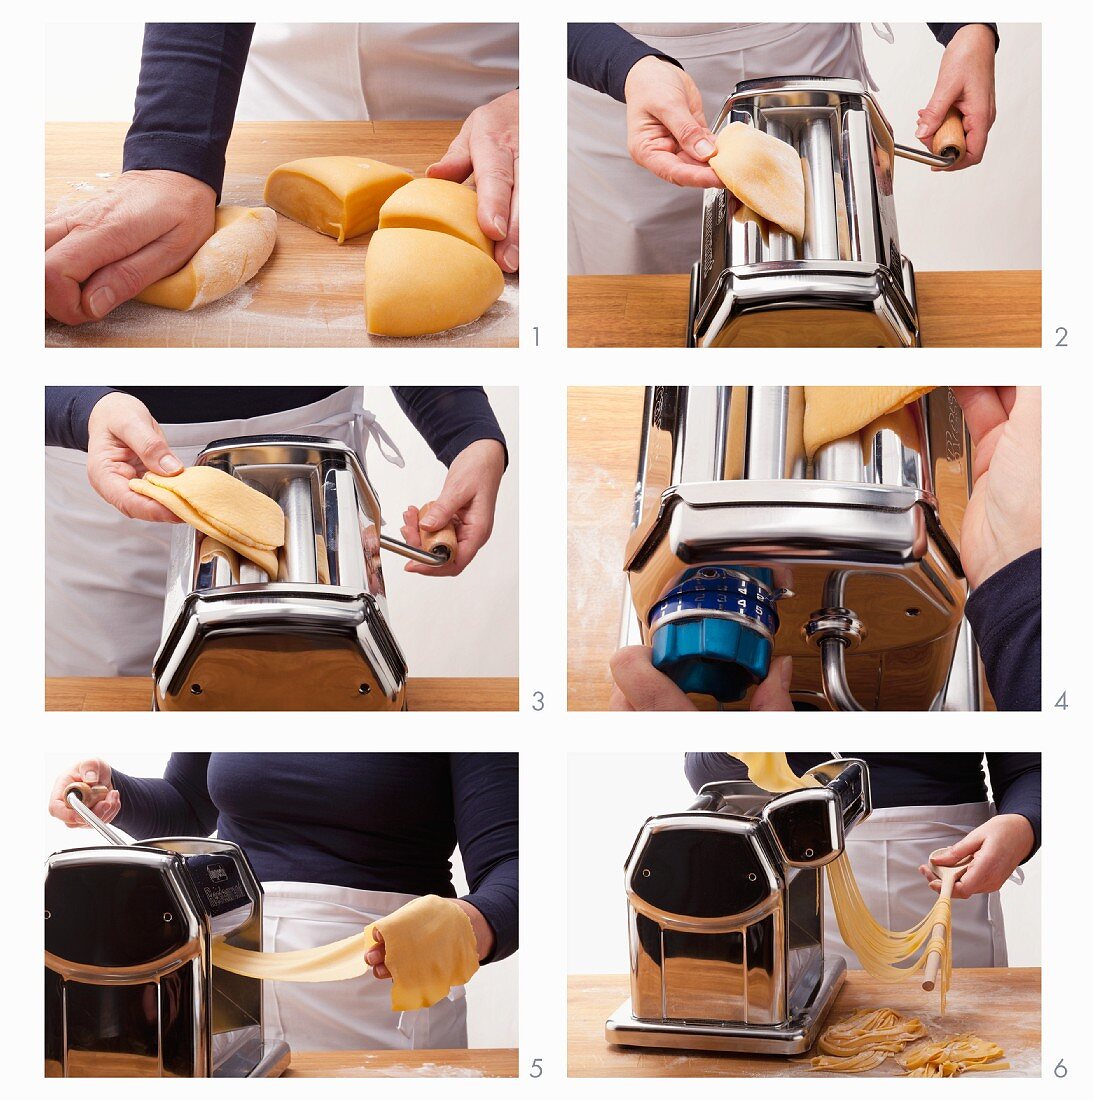 Pasta dough being rolled out and cut using a pasta machine